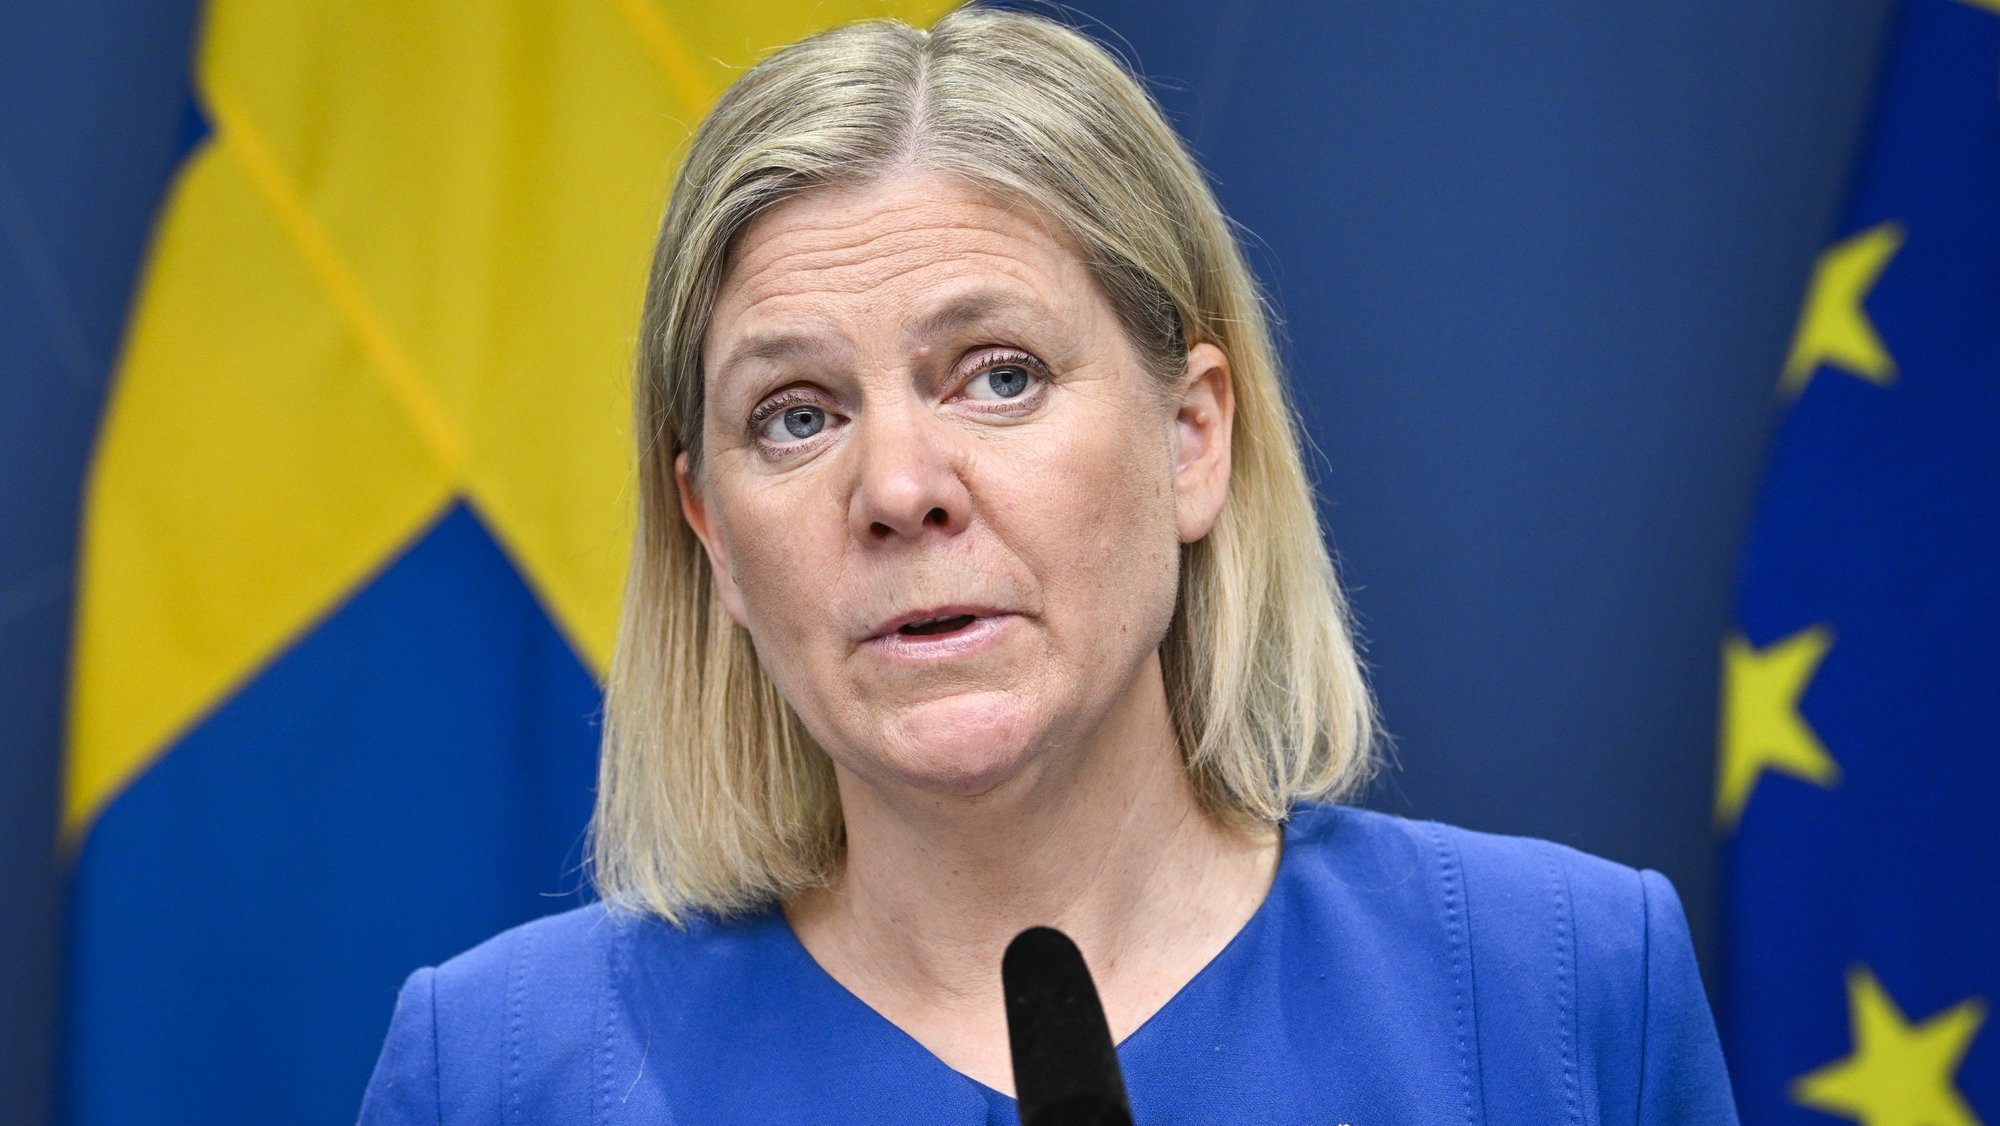 epa09950824 Sweden&#039;s Prime Minister Magdalena Andersson gives a news conference in Stockholm, Sweden, 16 May 2022. Sweden&#039;s government has decided to apply for a NATO membership. The Swedish Parliament held on the day a special debate about applying for NATO membership. The leaders of Sweden and Finland have confirmed they will apply for NATO membership as a result of Russia&#039;s invasion of Ukraine. The move would bring the expansion of the Western military alliance to 32 member countries.  EPA/HENRIK MONTGOMERY  SWEDEN OUT